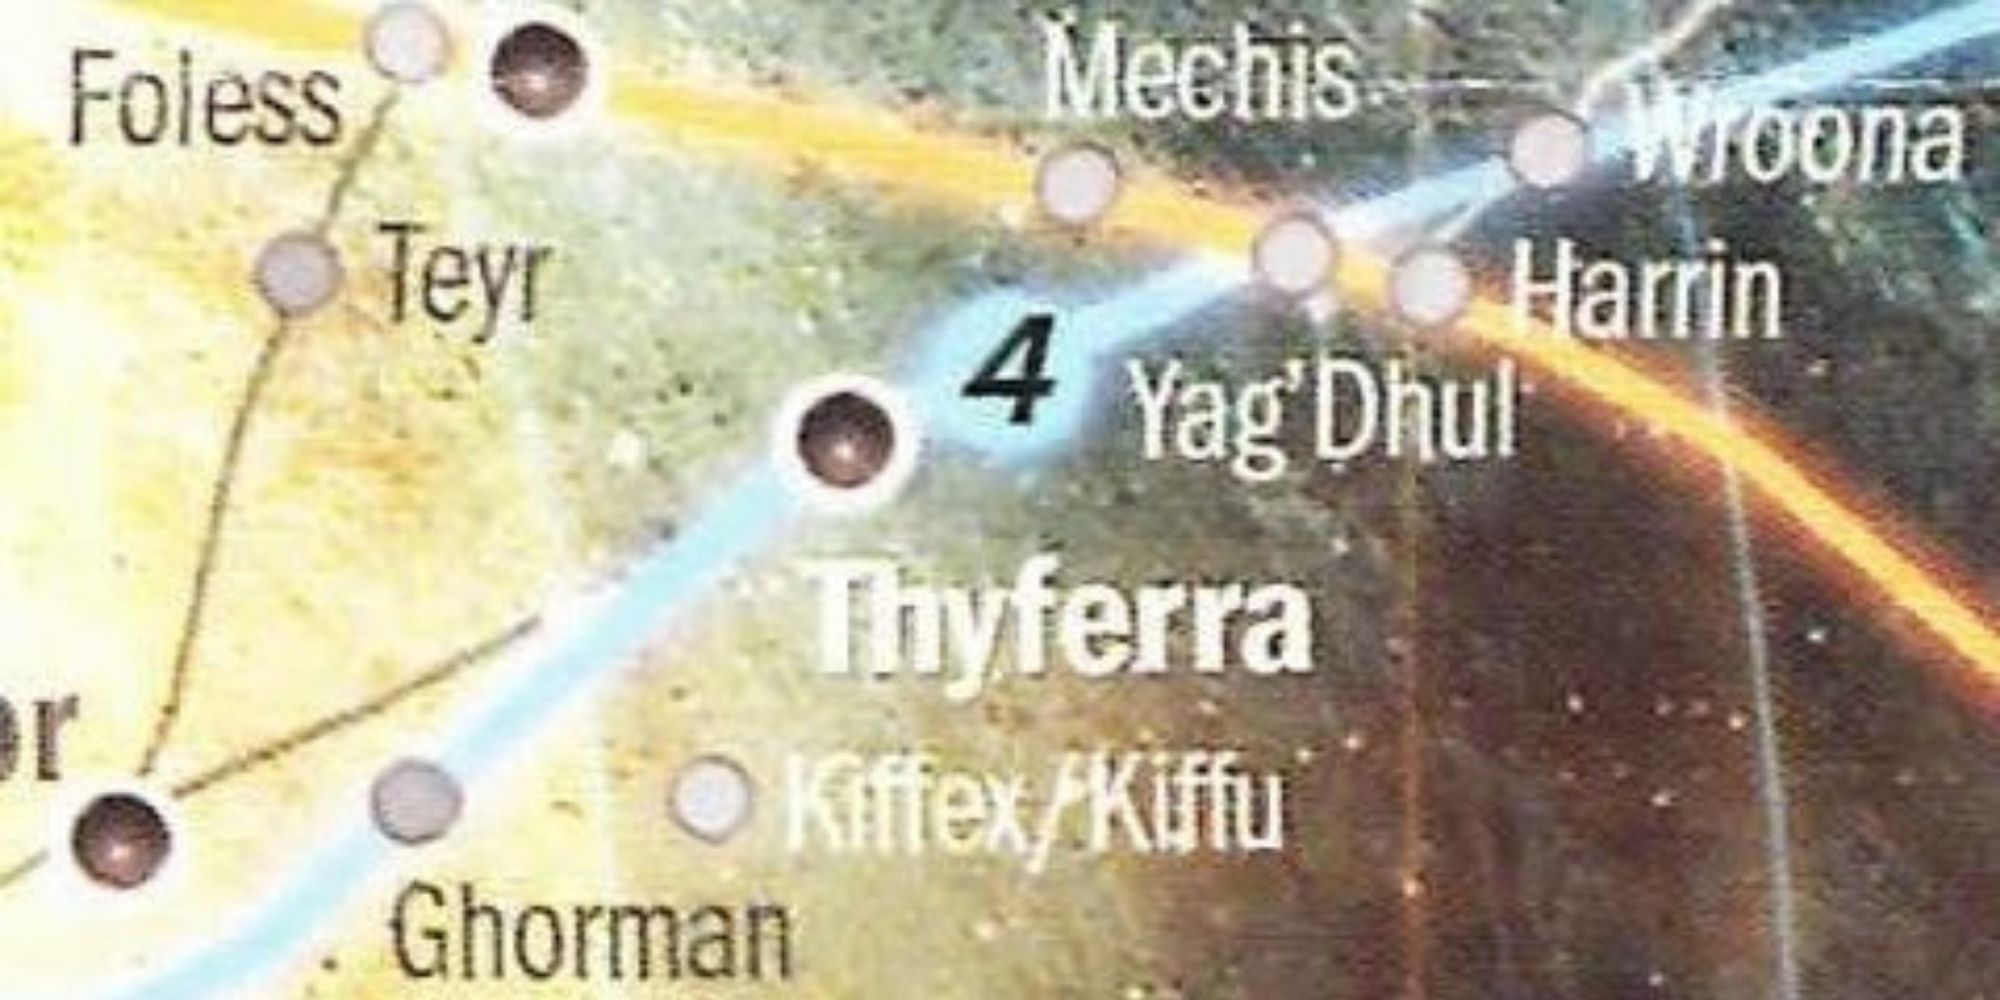 The planet Thyferra's location on a star chart from Star Wars. 